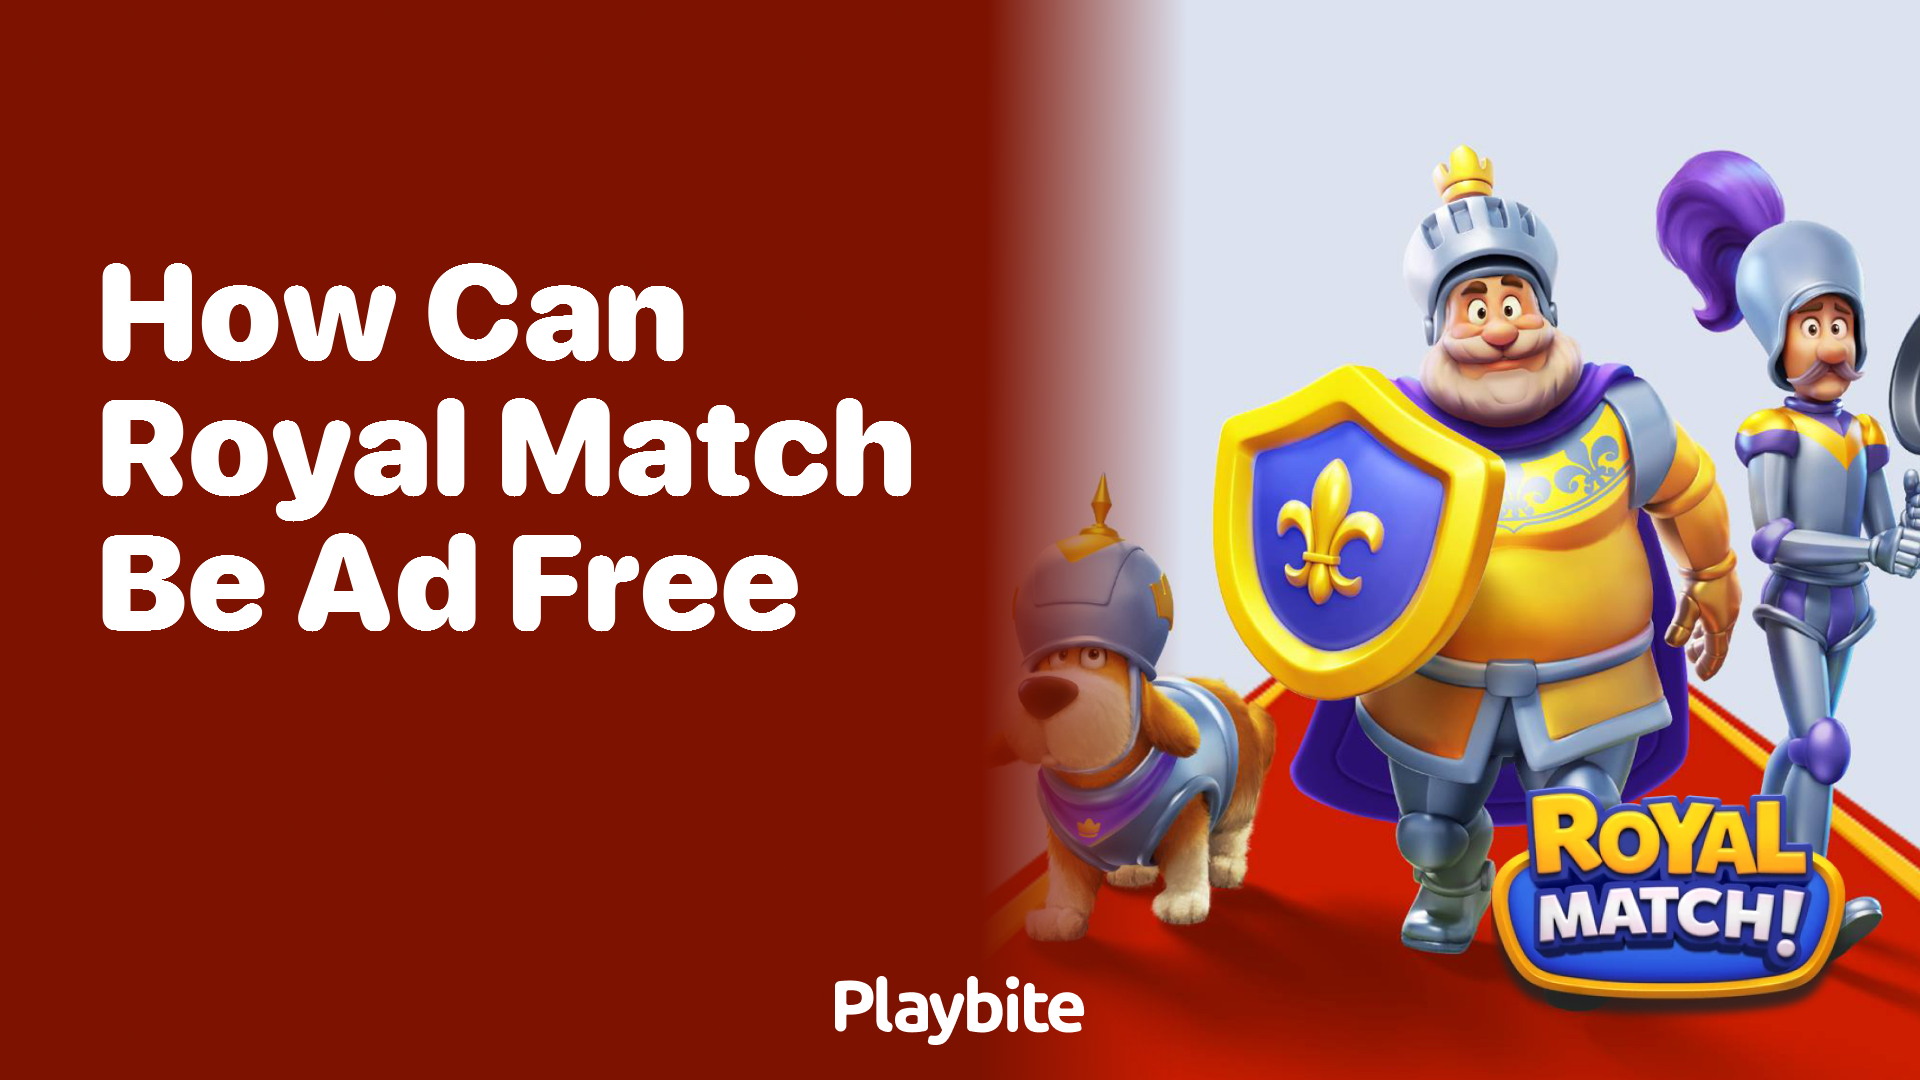 How Can Royal Match Be Ad-Free?